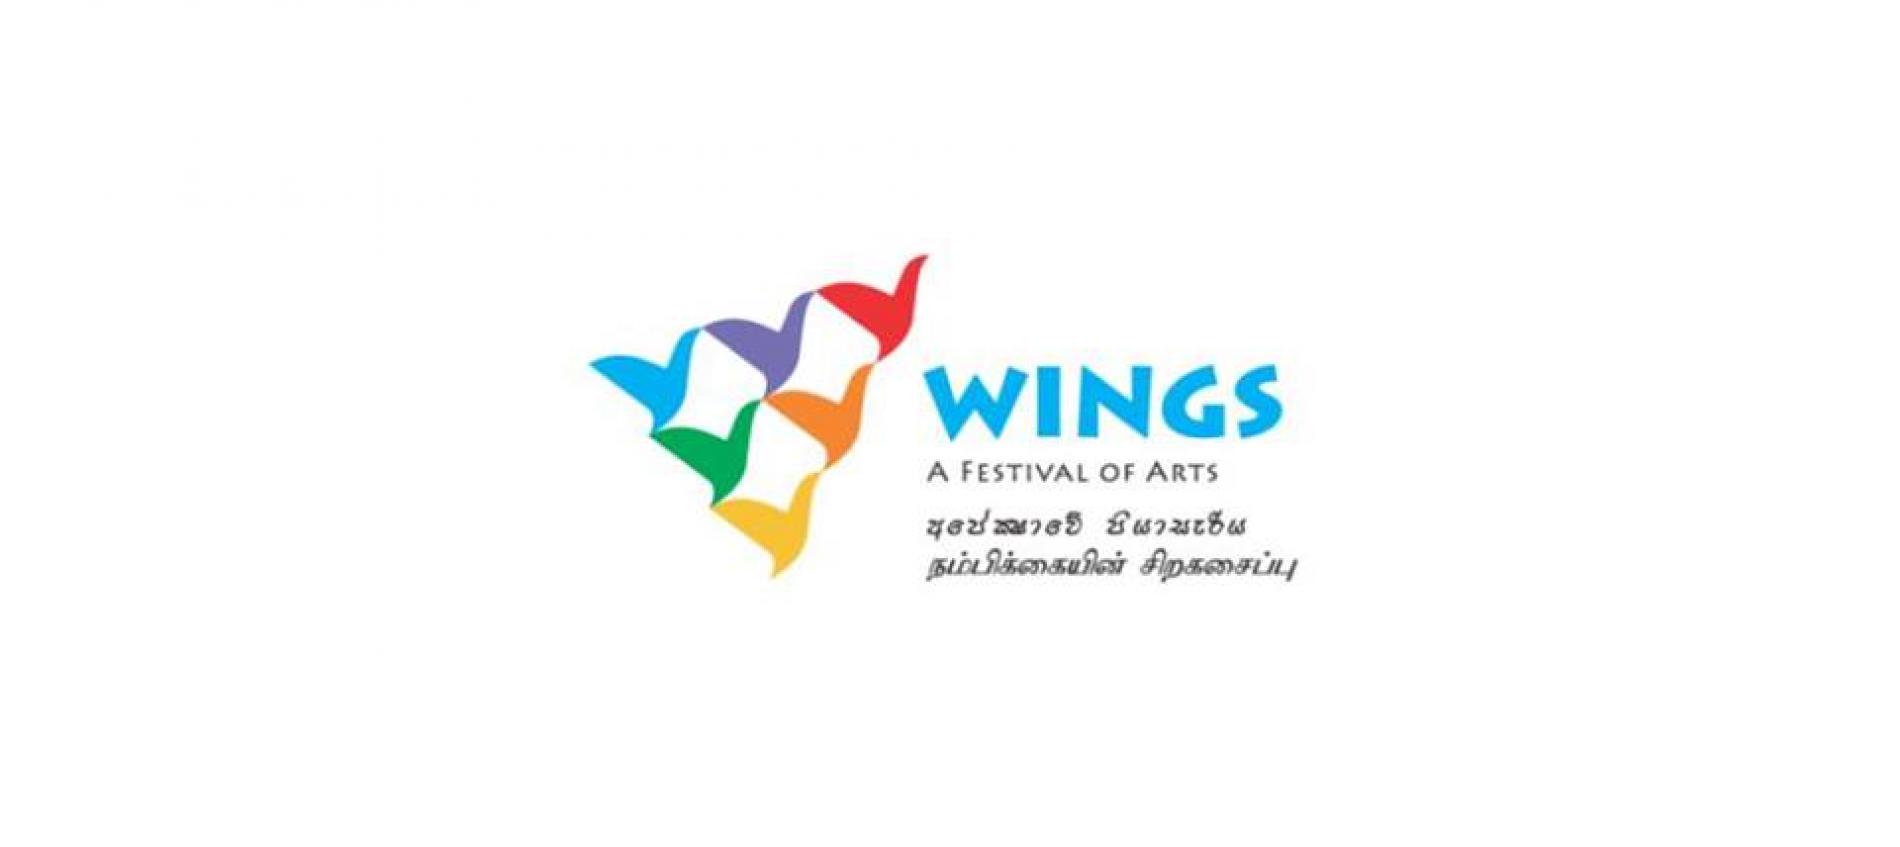 Baliphonics and Transcoastal Collective at WINGS Festival